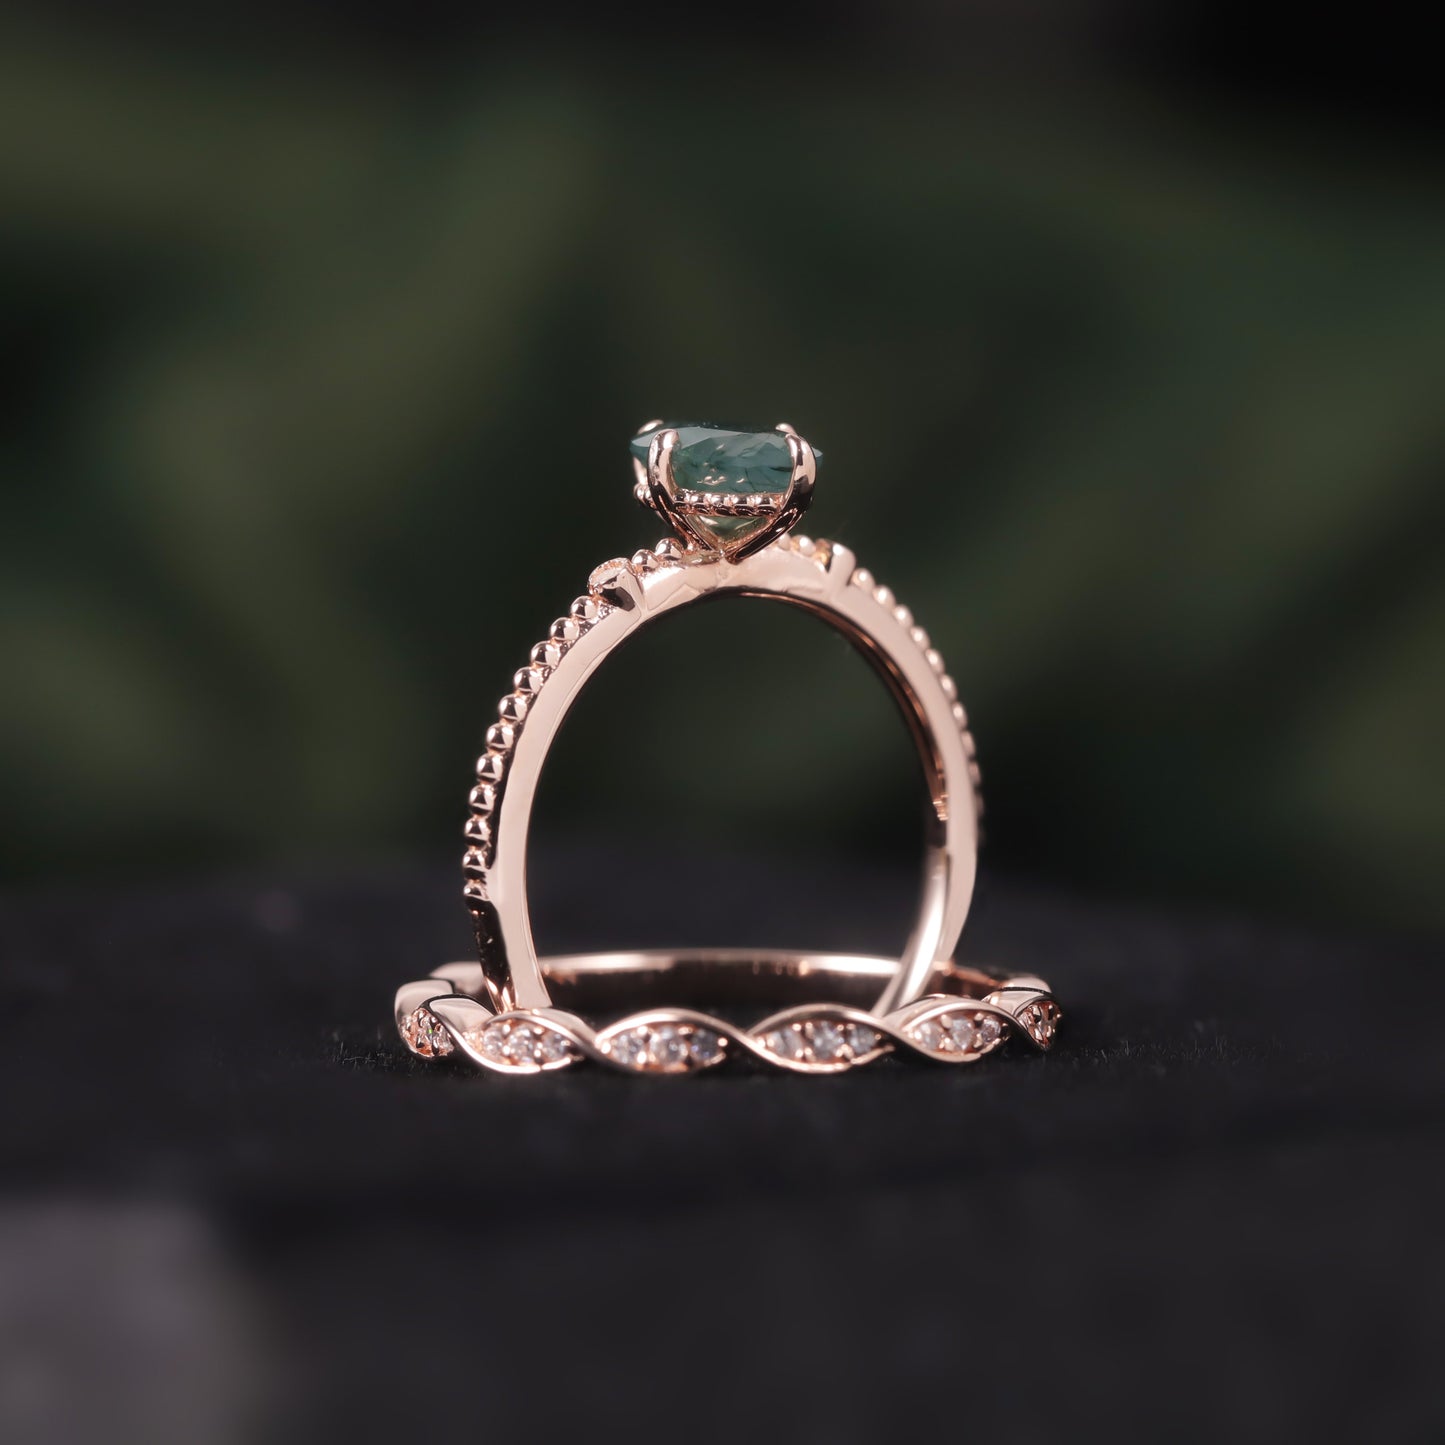 Oval Shaped Moss Agate Vintage Solitaire Ring